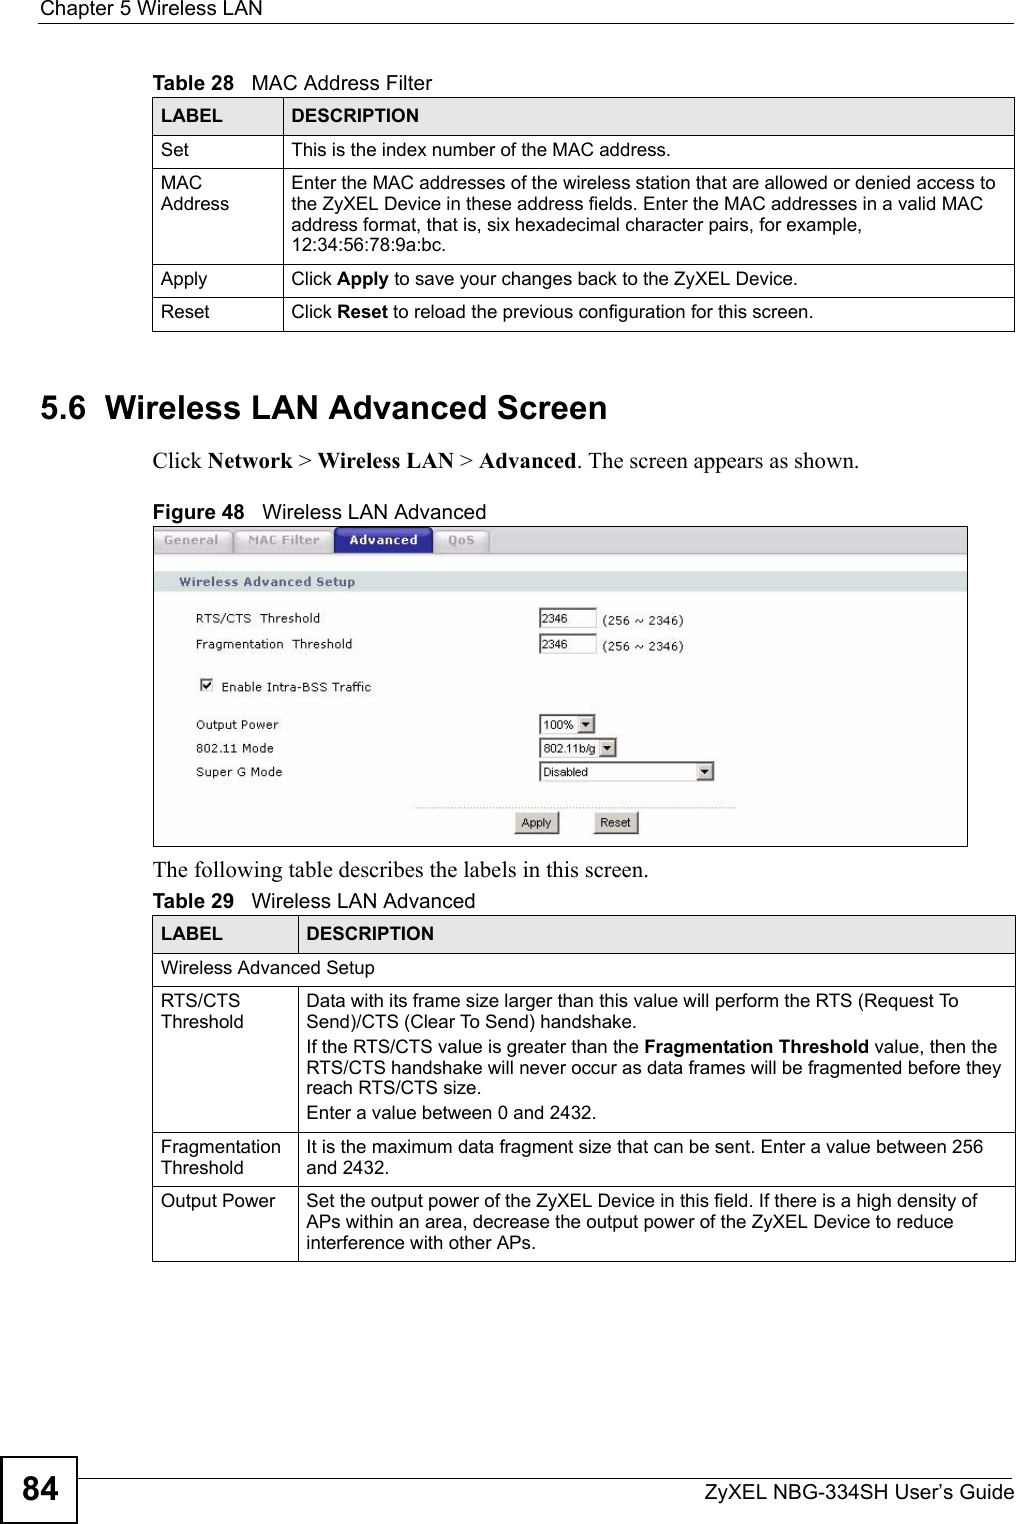 Chapter 5 Wireless LANZyXEL NBG-334SH User’s Guide845.6  Wireless LAN Advanced ScreenClick Network &gt; Wireless LAN &gt; Advanced. The screen appears as shown.Figure 48   Wireless LAN AdvancedThe following table describes the labels in this screen. Set This is the index number of the MAC address.MAC AddressEnter the MAC addresses of the wireless station that are allowed or denied access to the ZyXEL Device in these address fields. Enter the MAC addresses in a valid MAC address format, that is, six hexadecimal character pairs, for example, 12:34:56:78:9a:bc.Apply Click Apply to save your changes back to the ZyXEL Device.Reset Click Reset to reload the previous configuration for this screen.Table 28   MAC Address FilterLABEL DESCRIPTIONTable 29   Wireless LAN AdvancedLABEL DESCRIPTIONWireless Advanced SetupRTS/CTS ThresholdData with its frame size larger than this value will perform the RTS (Request To Send)/CTS (Clear To Send) handshake. If the RTS/CTS value is greater than the Fragmentation Threshold value, then the RTS/CTS handshake will never occur as data frames will be fragmented before they reach RTS/CTS size.Enter a value between 0 and 2432. Fragmentation ThresholdIt is the maximum data fragment size that can be sent. Enter a value between 256 and 2432. Output Power  Set the output power of the ZyXEL Device in this field. If there is a high density of APs within an area, decrease the output power of the ZyXEL Device to reduce interference with other APs.